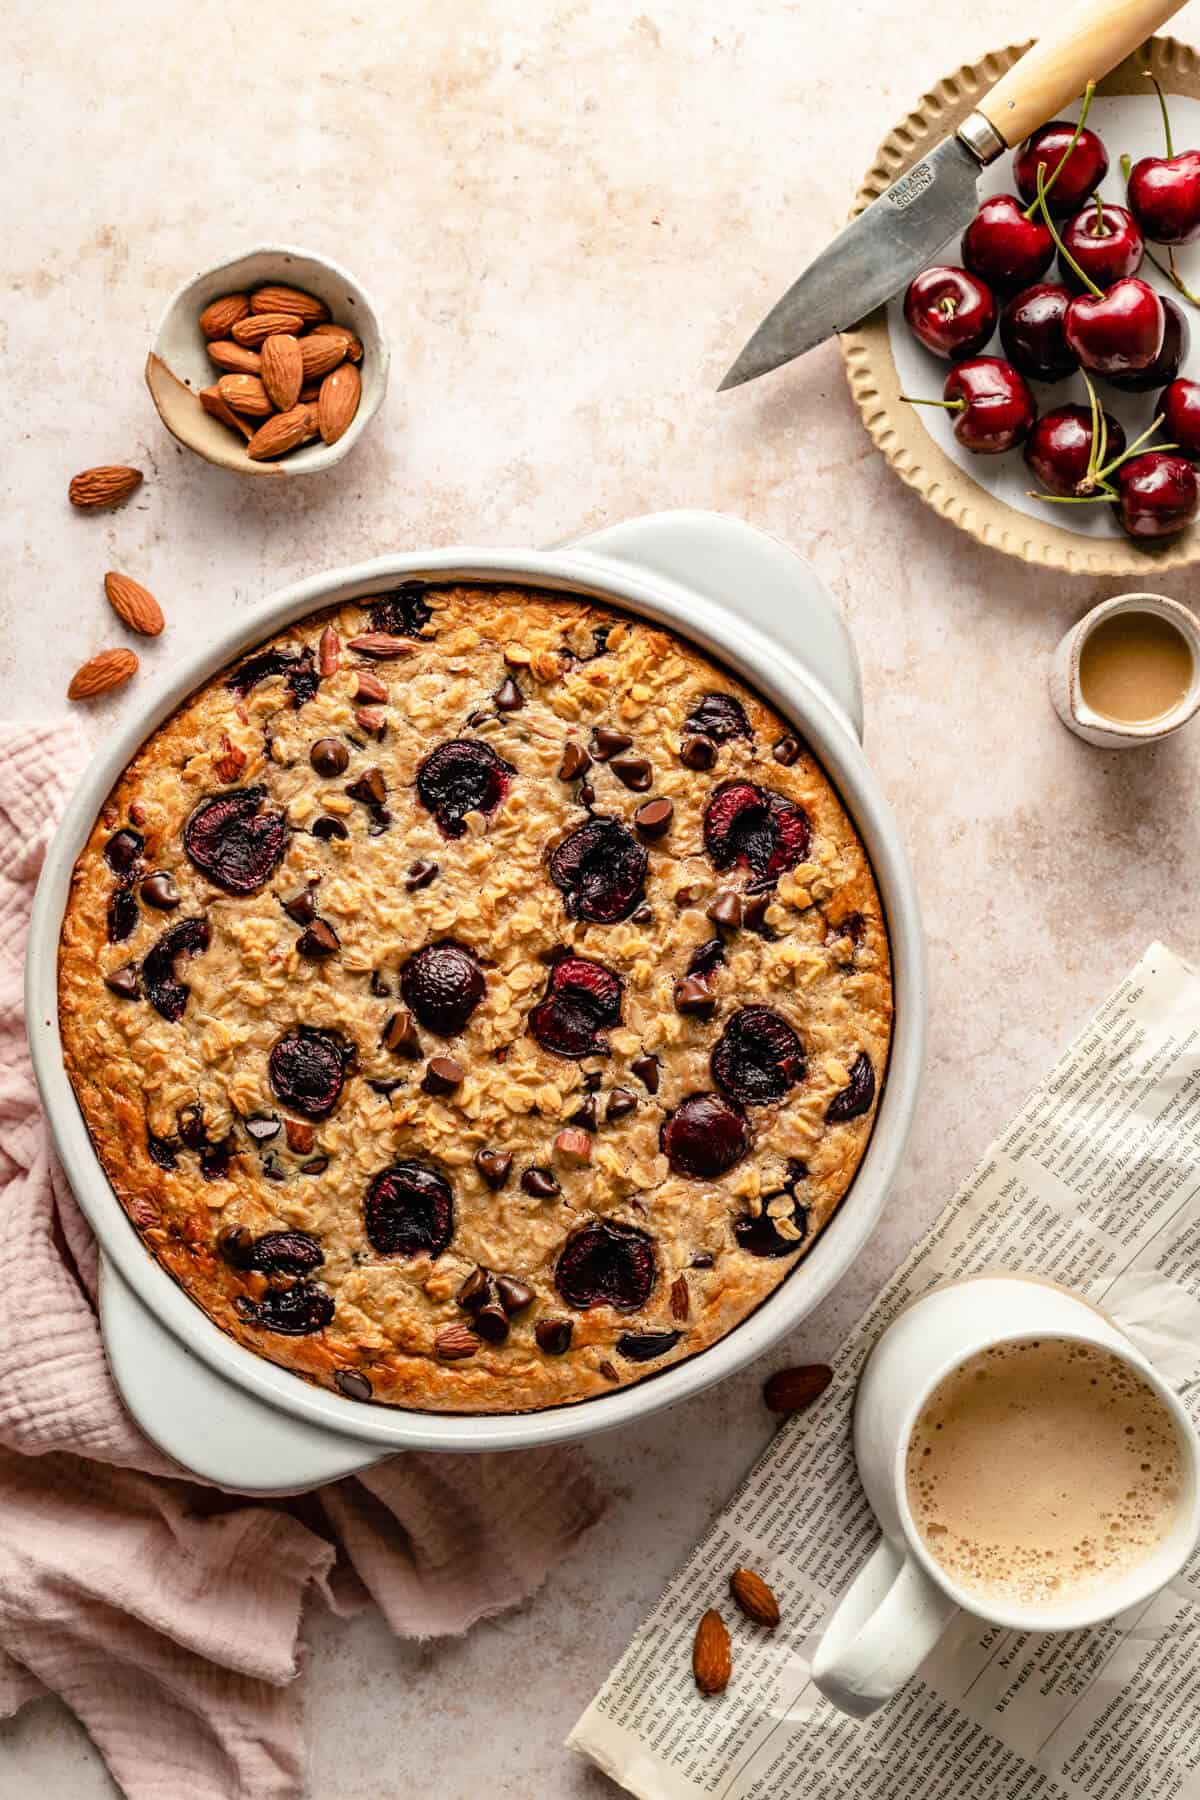 Cherry Chocolate Chip baked oatmeal in a baking dish with a mug of coffee and paper nearby.